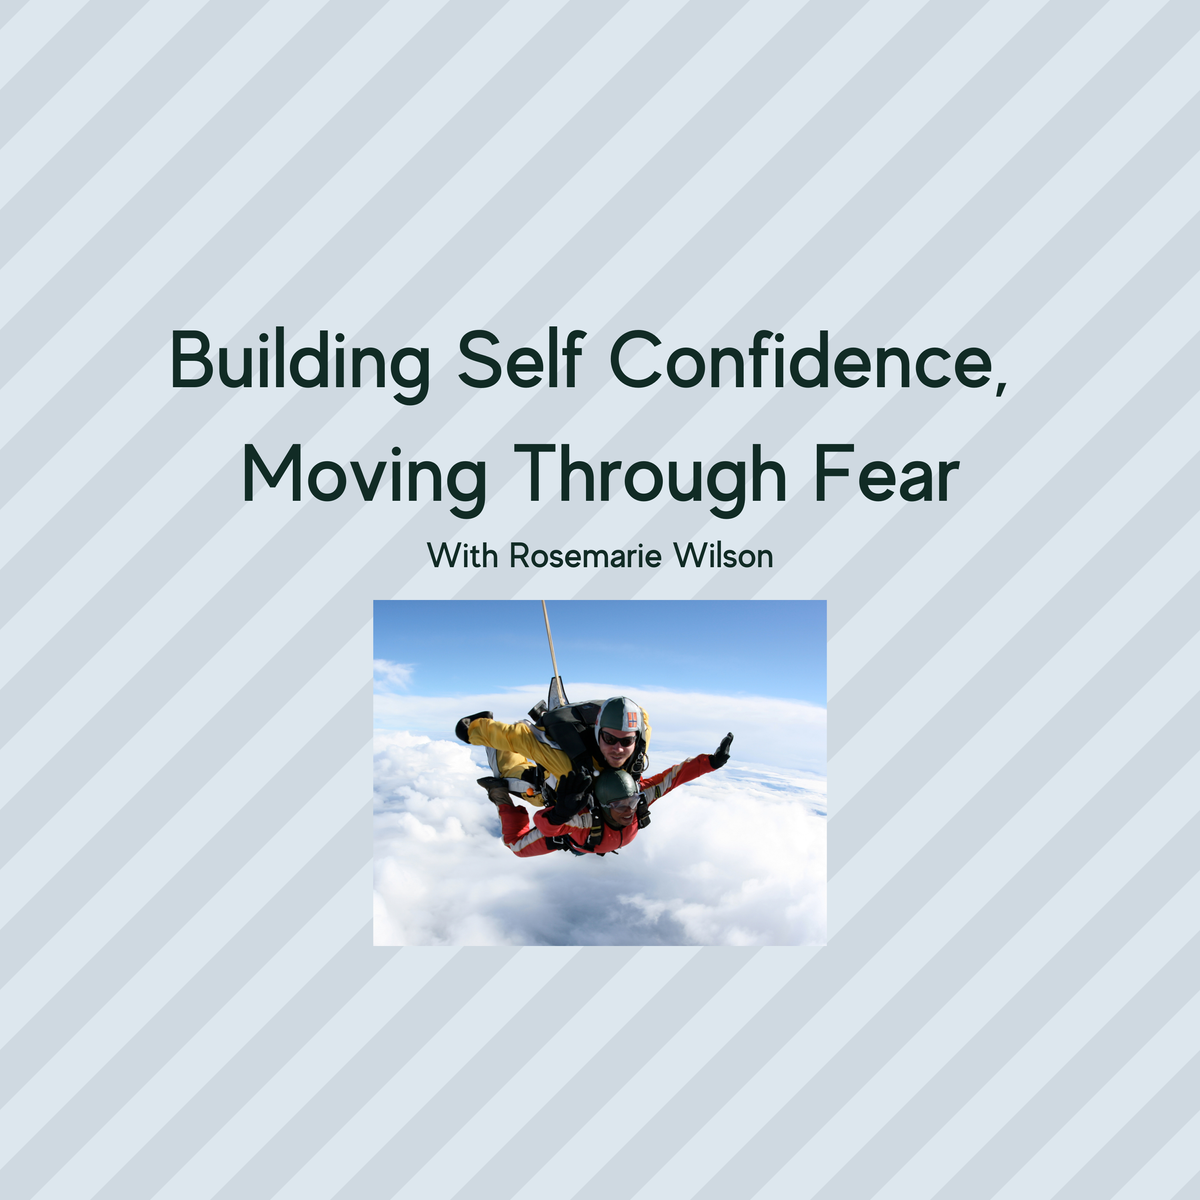 Building Self Confidence, Moving Through Fear with Rosemarie Wilson